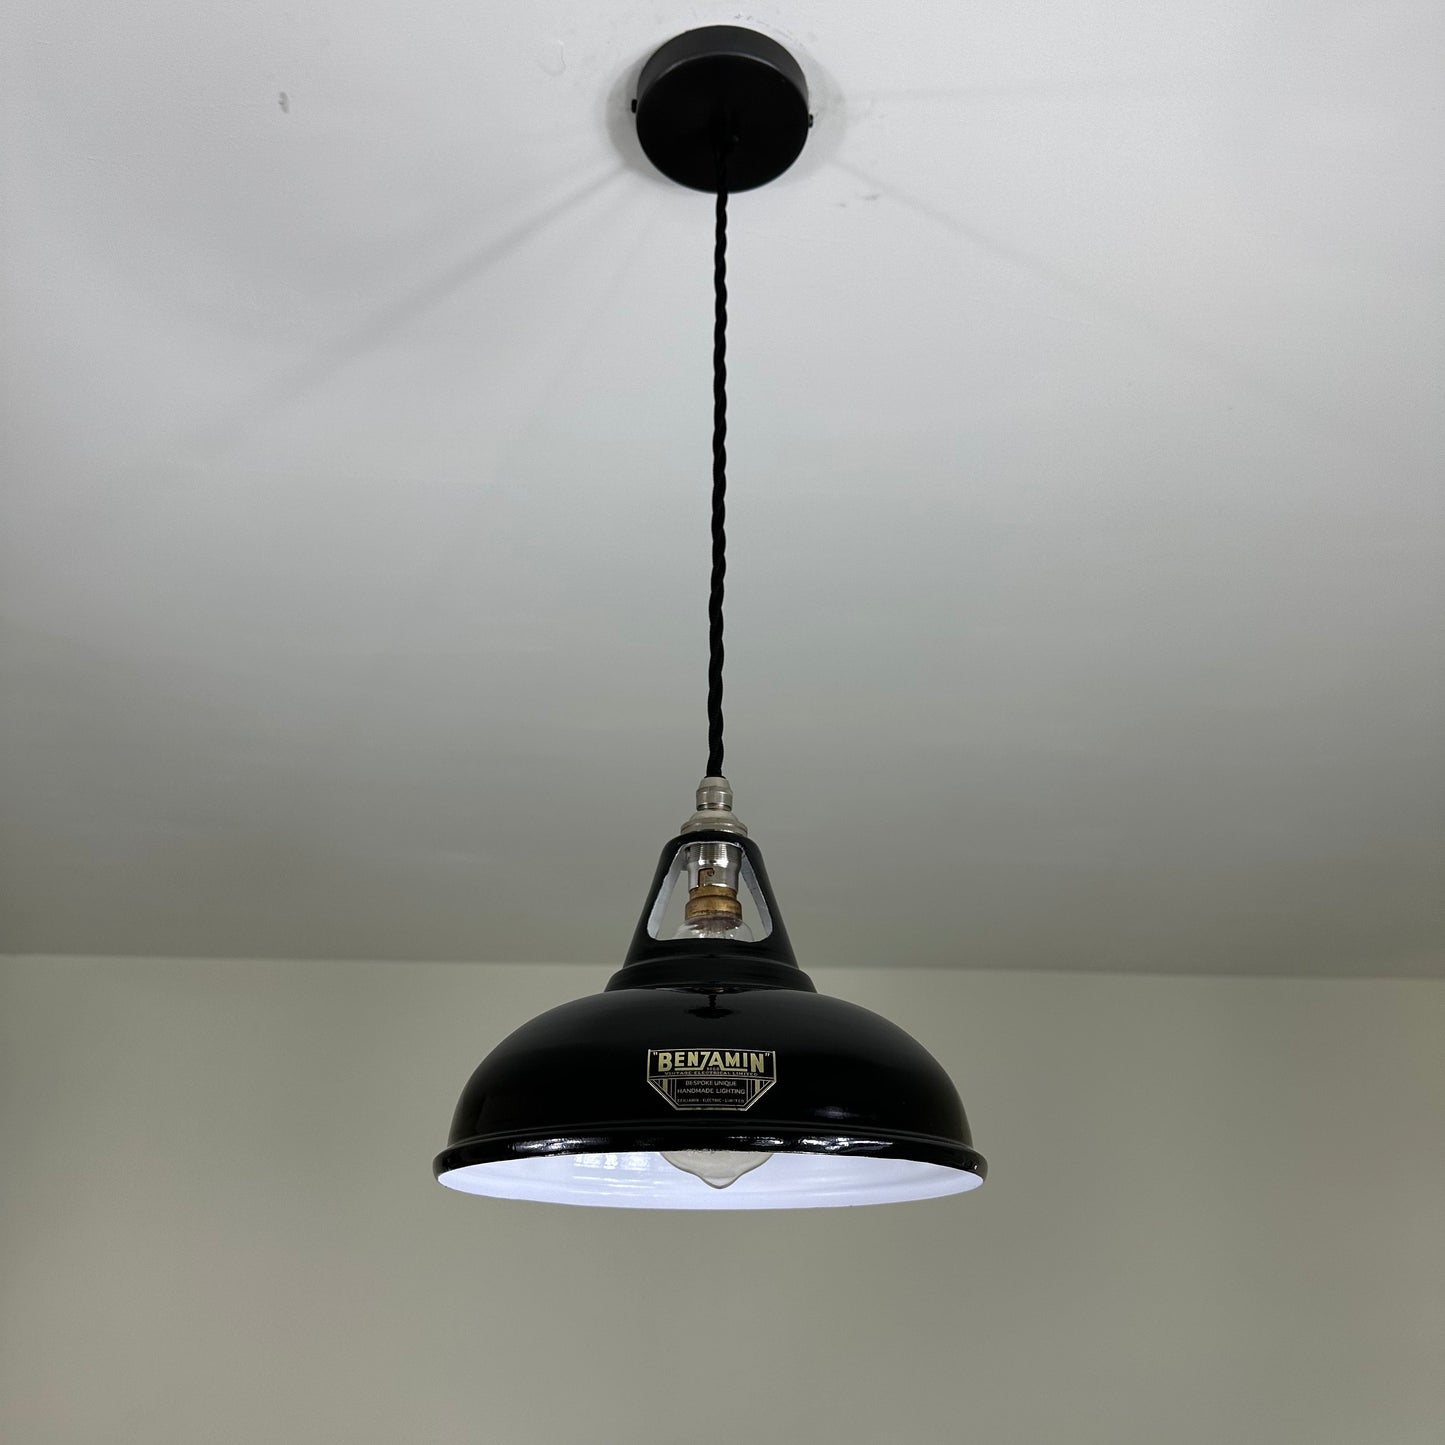 Cawston Small ~ Midnight Black Solid Industrial Slotted Design Shade Pendant Light | Ceiling Dining Room | Kitchen Table | Vintage 9 Inch